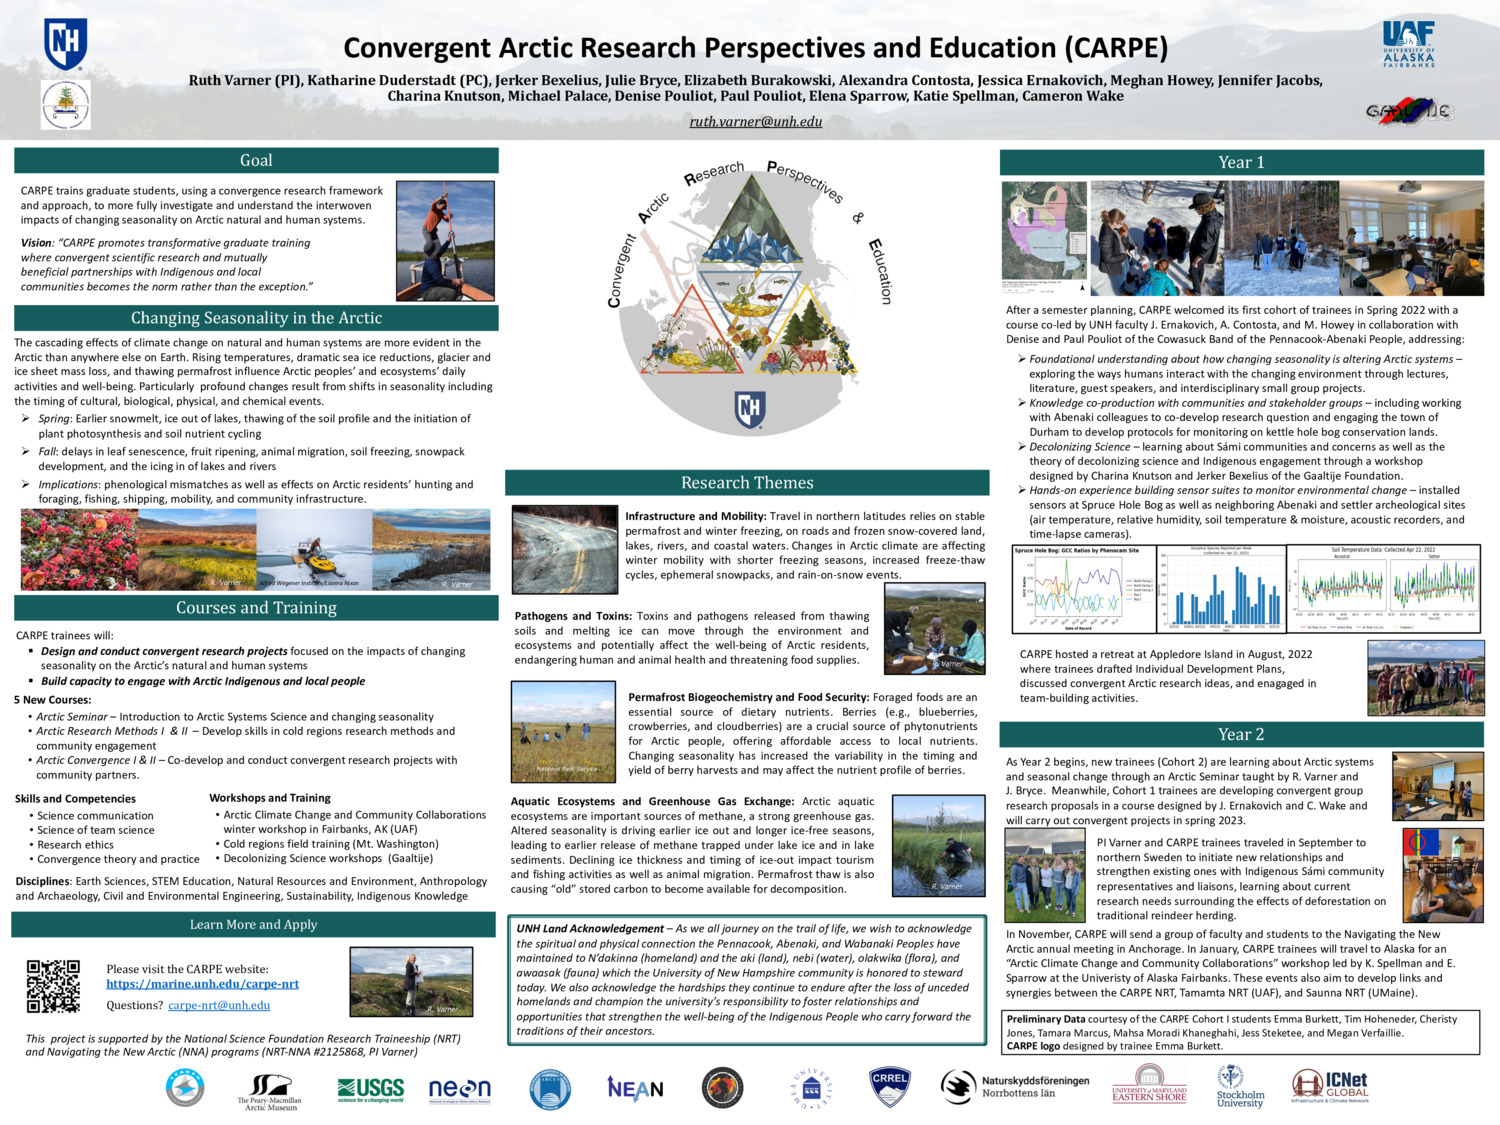 Convergent Arctic Research Perspective And Education by duderstadtk